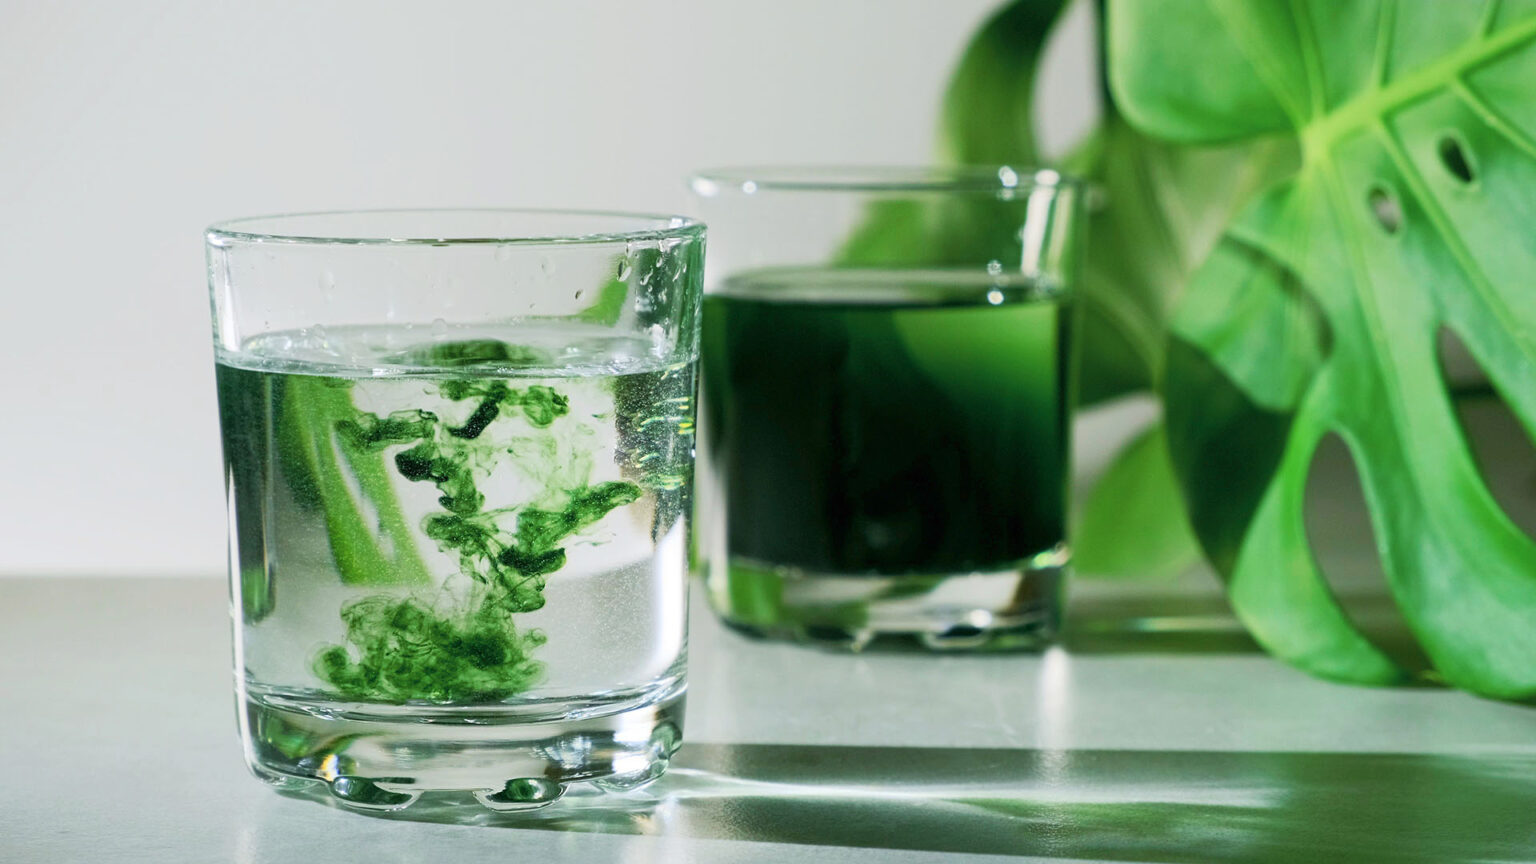 Chlorophyll extract is poured in pure water in glass against a w